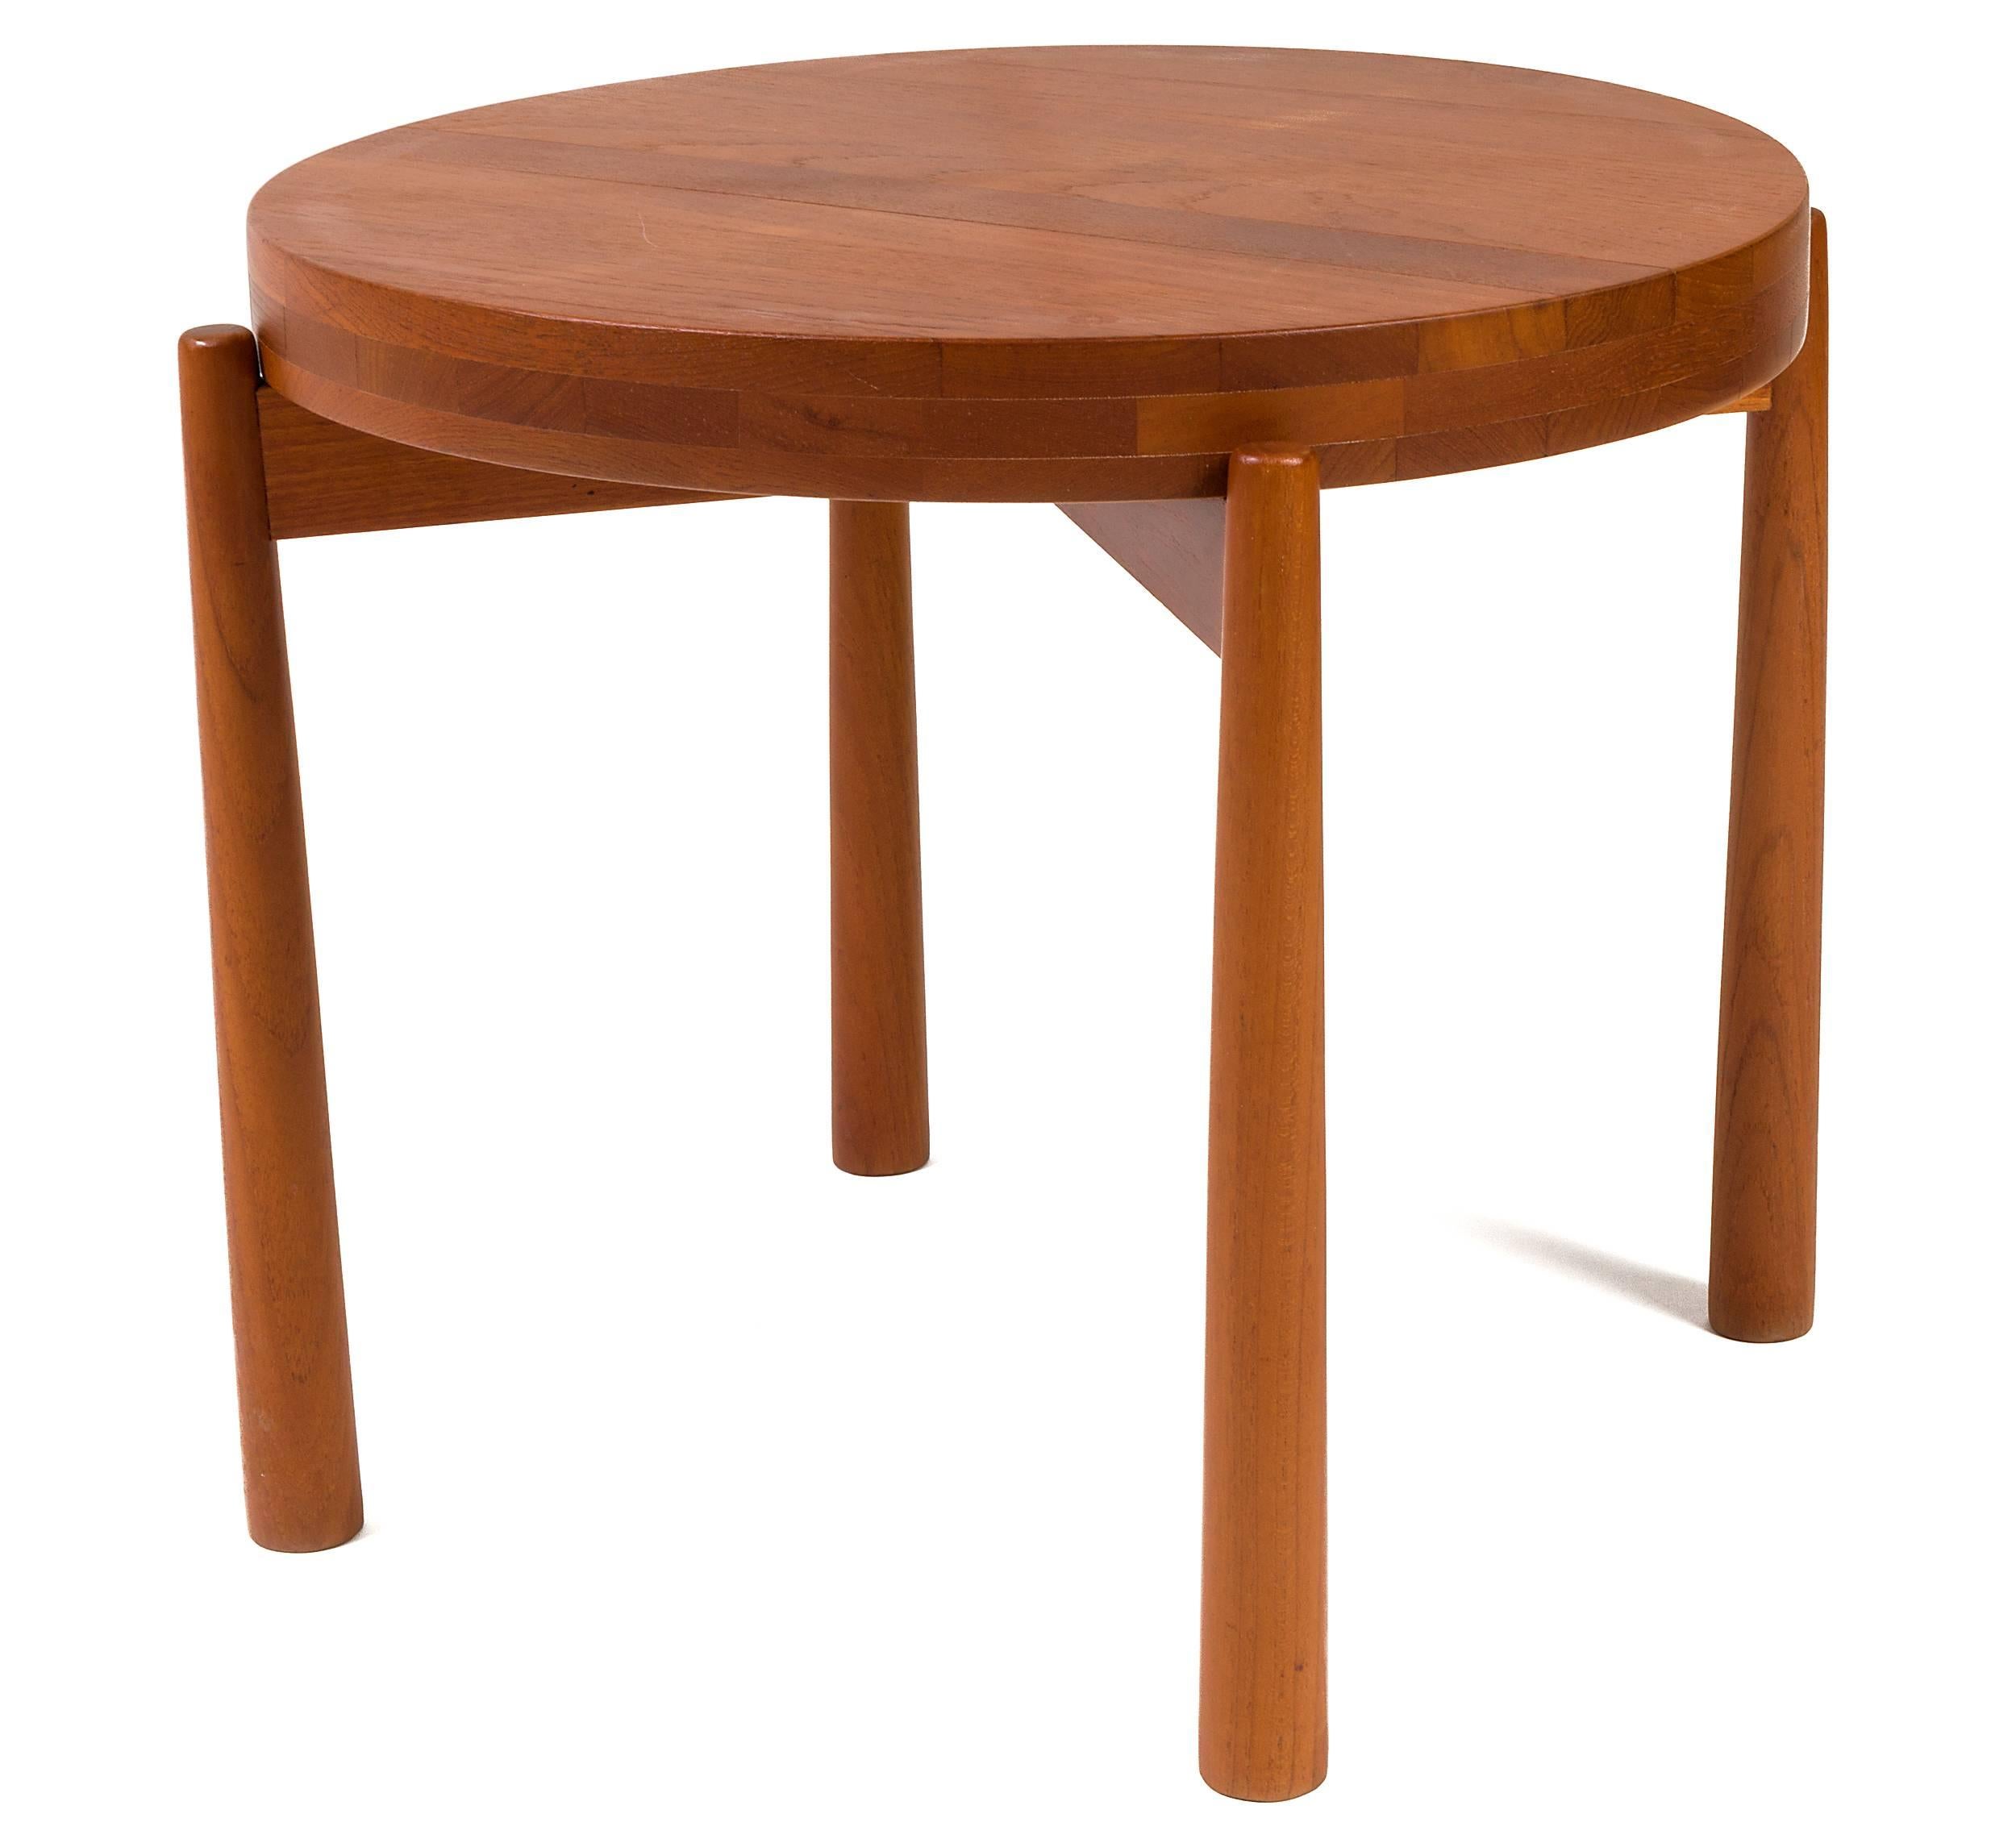 A solid staved teak tray table, in the style of Jens Quistgaard. This piece is made of solid staves of teak laminated together to form a butcher block style construction. The tabletop is reversible and is concave on one side and flat on the other.